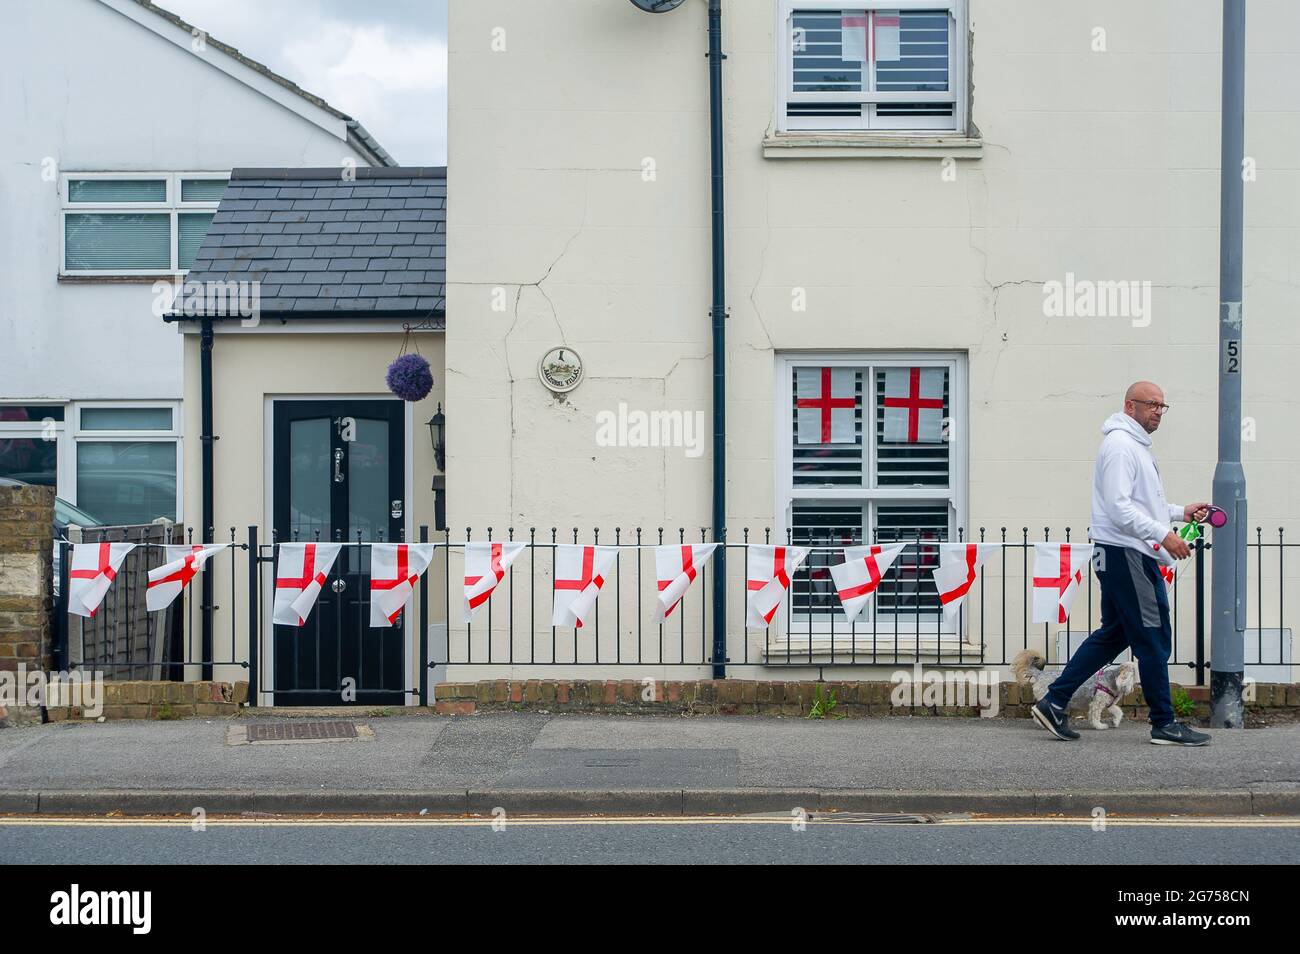 Dedworth, Windsor, Berkshire, UK. 11th July, 2021. England flags and bunting hang from houses and apartments in Dedworth Windsor ahead of tonight's UEFA Euro 2020 final between England v Italy. Credit: Maureen McLean/Alamy Live News Stock Photo